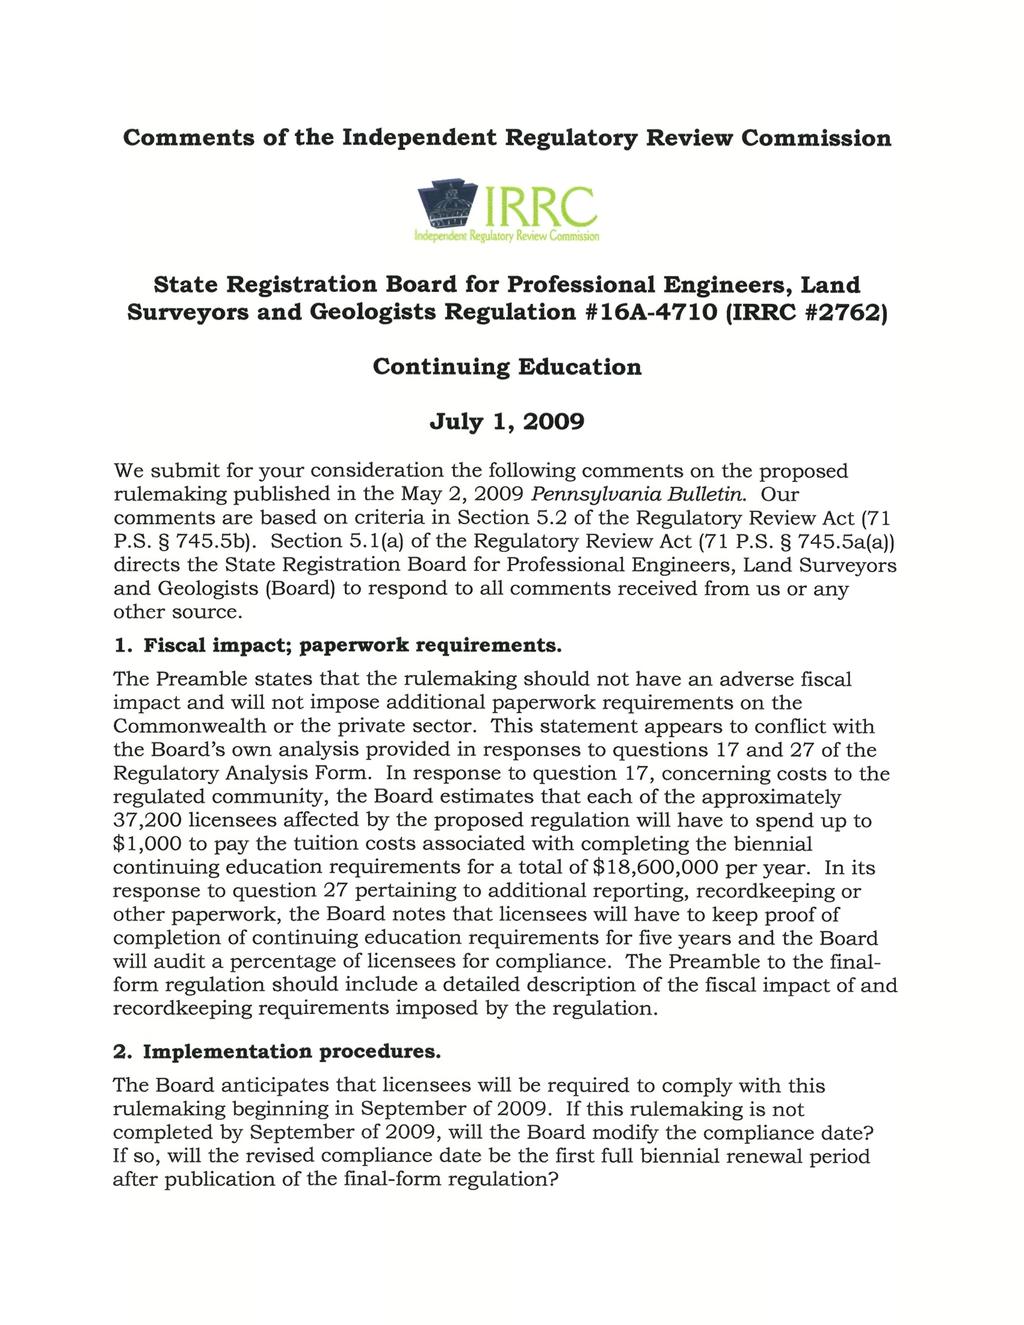 Comments of the Independent Regulatory Review Commission IRRC Regulatory Review Commission State Registration Board for Professional Engineers, Land Surveyors and Geologists Regulation #16A-4710